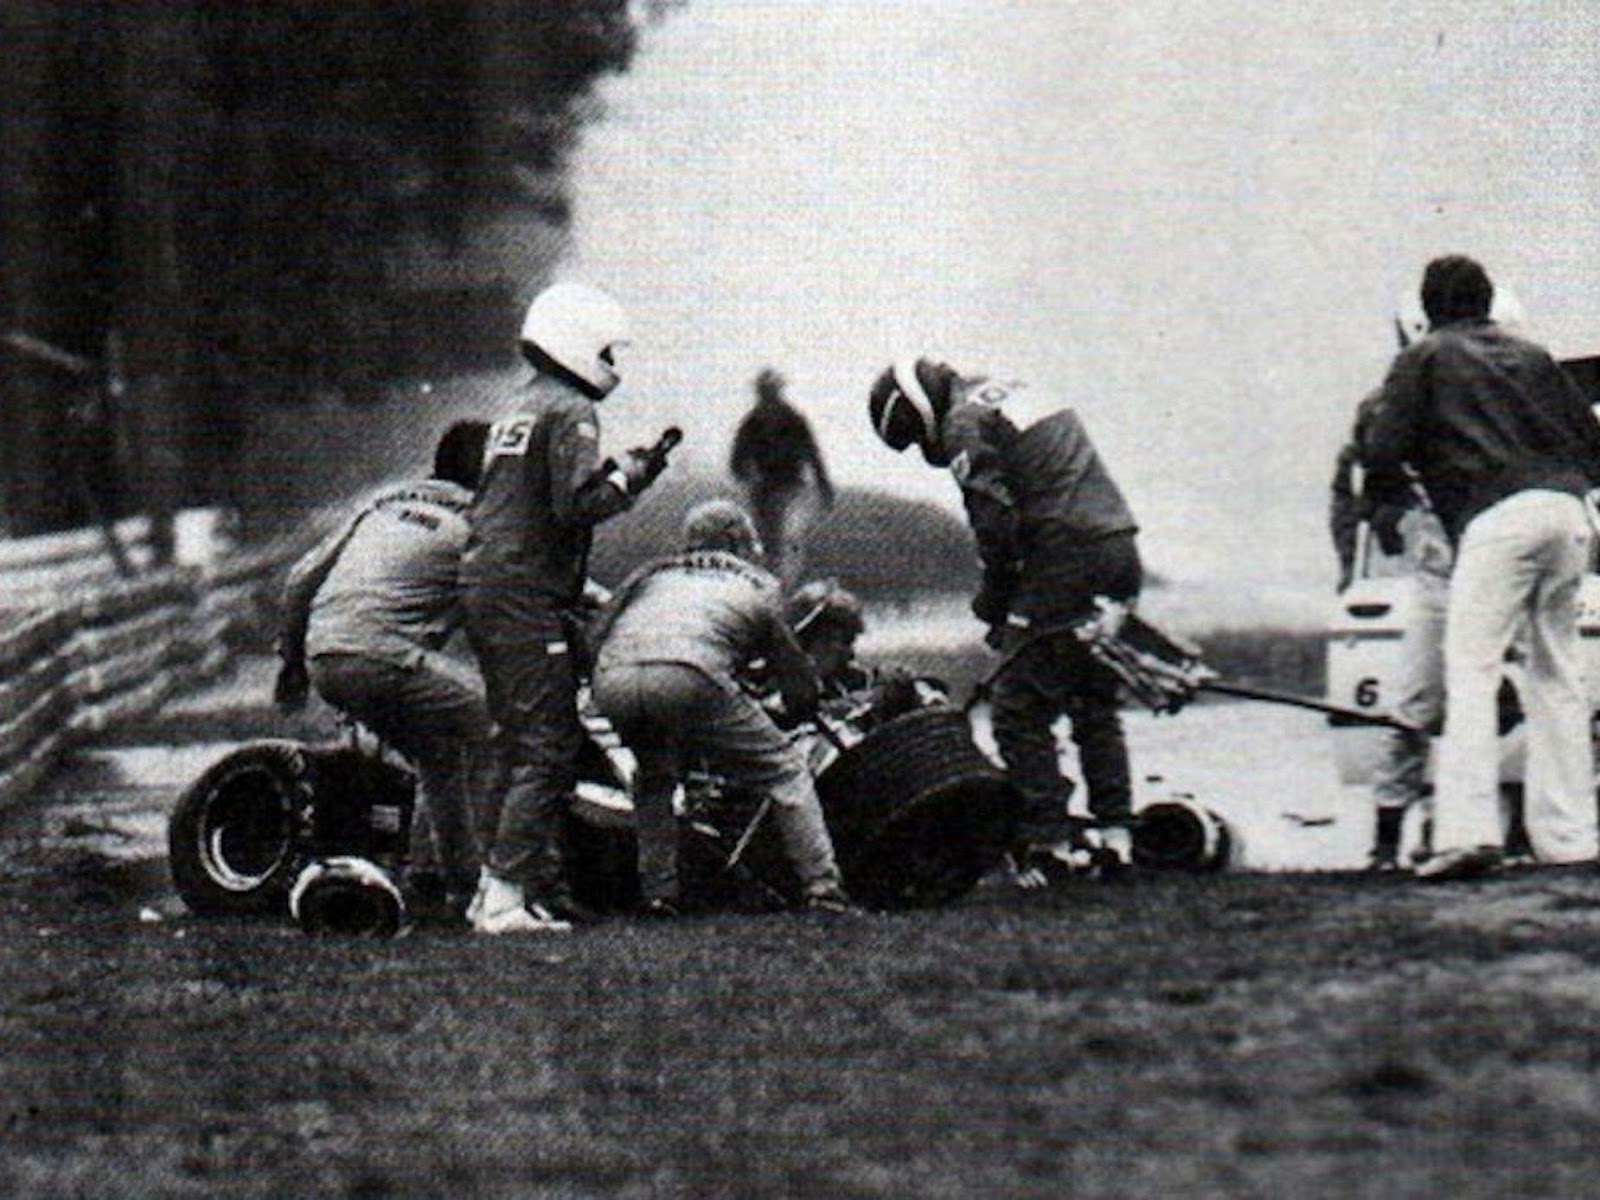 The accident of Didier Pironi.